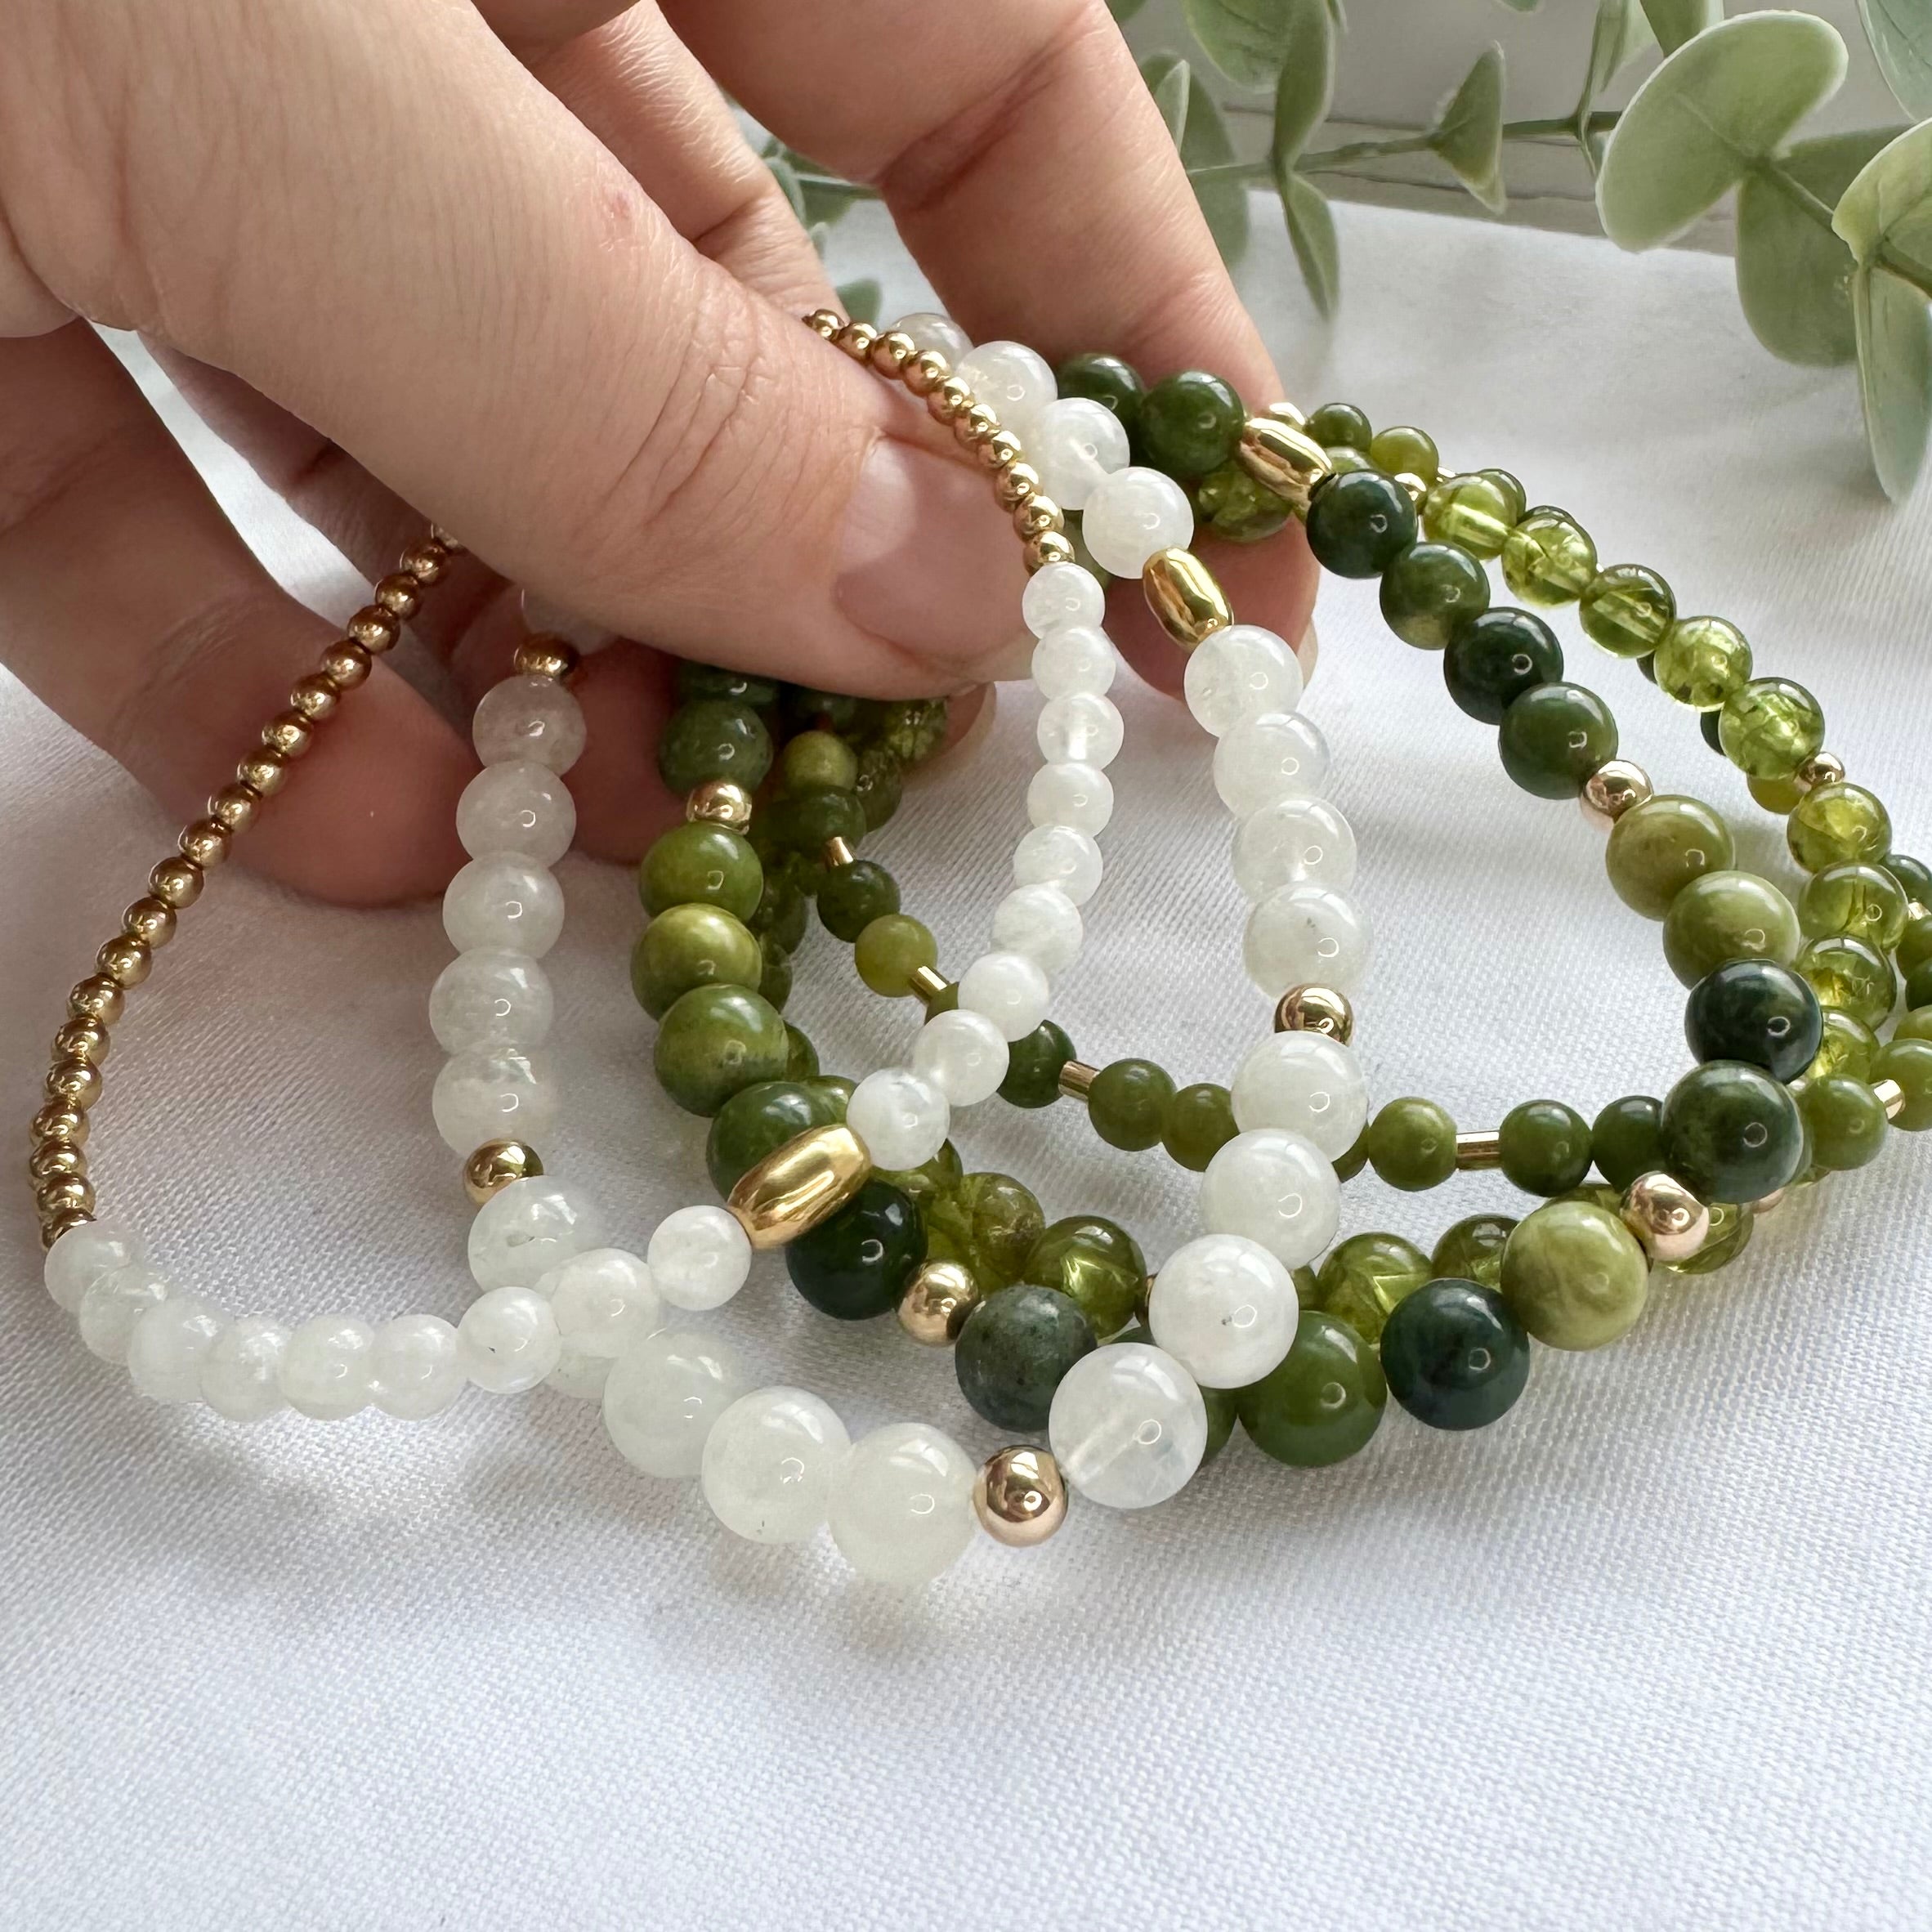 Gemstone and gold stretch bracelets in green and white colouring